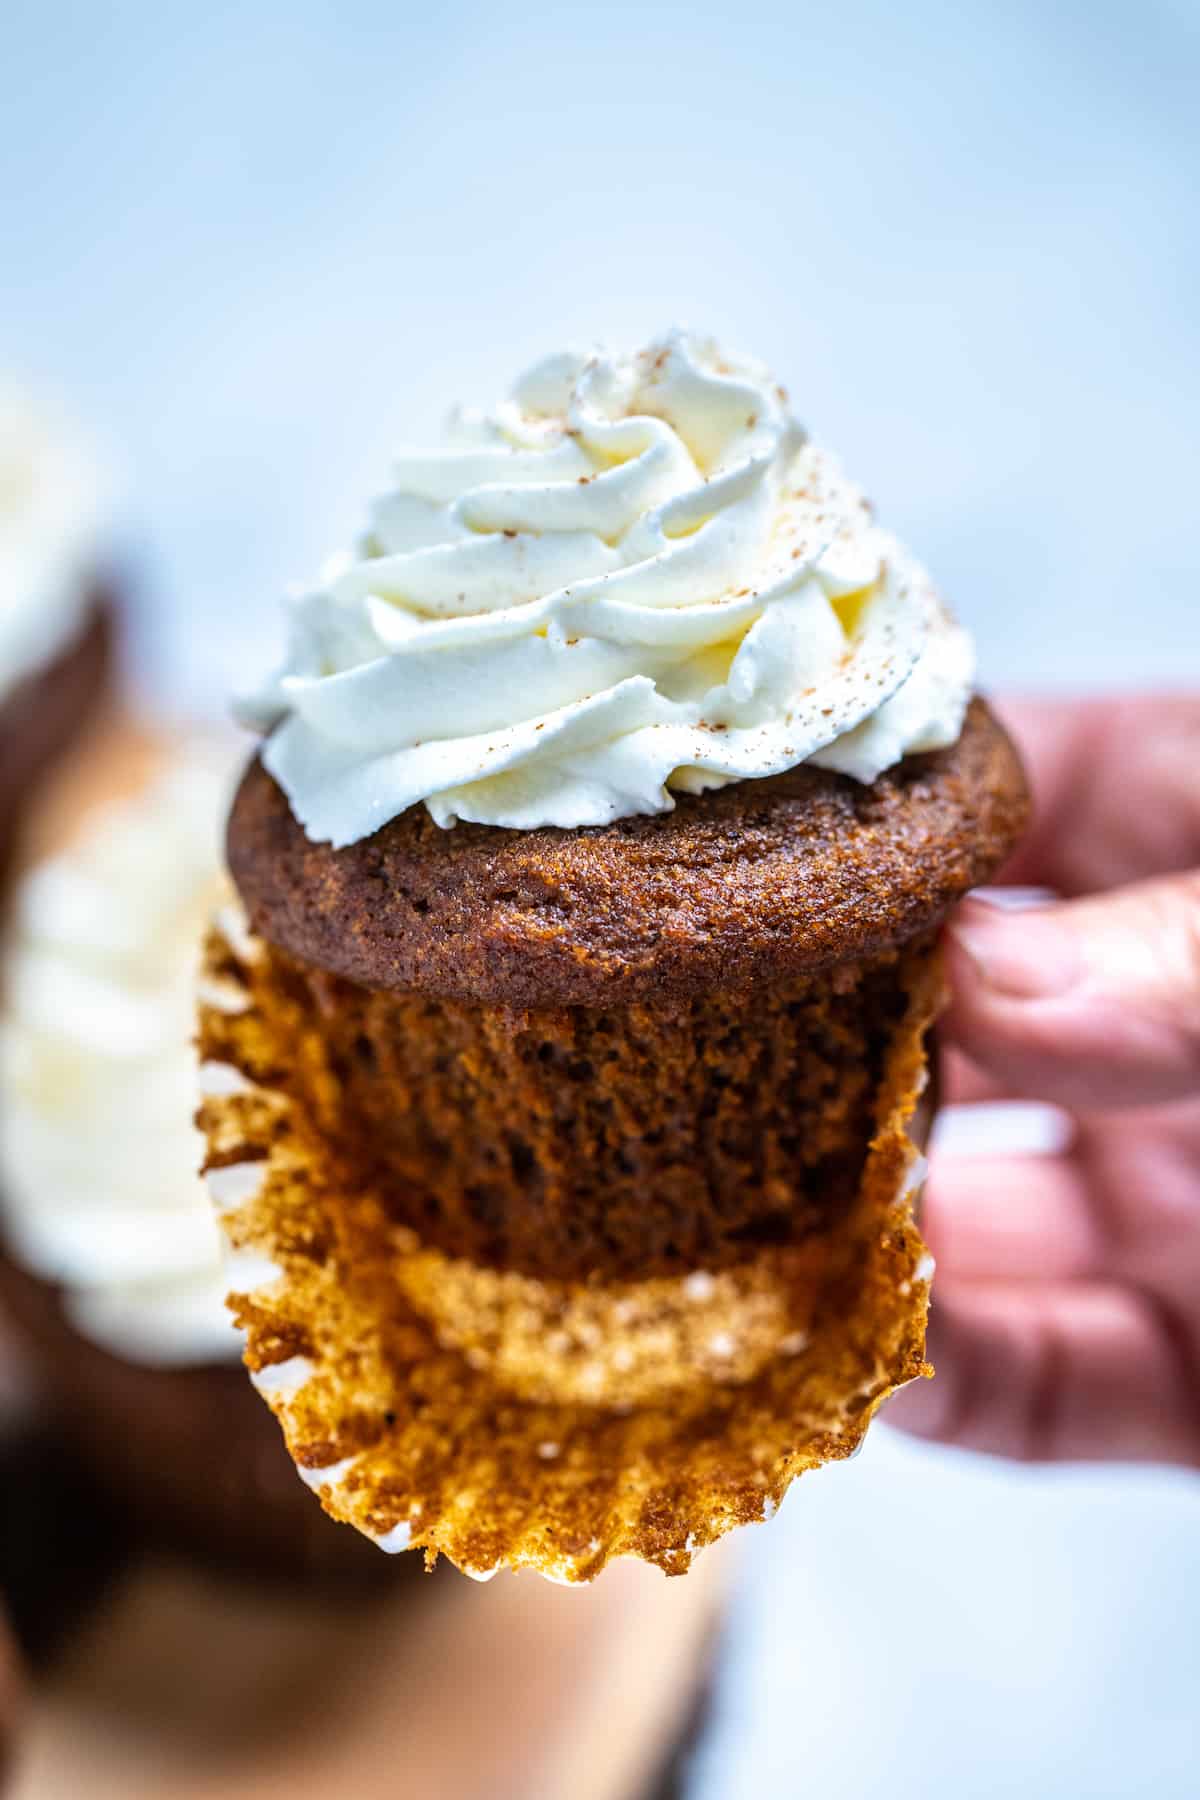 A hand holding a gingerbread cupcake with frosting, with the paper liner half peeled off.